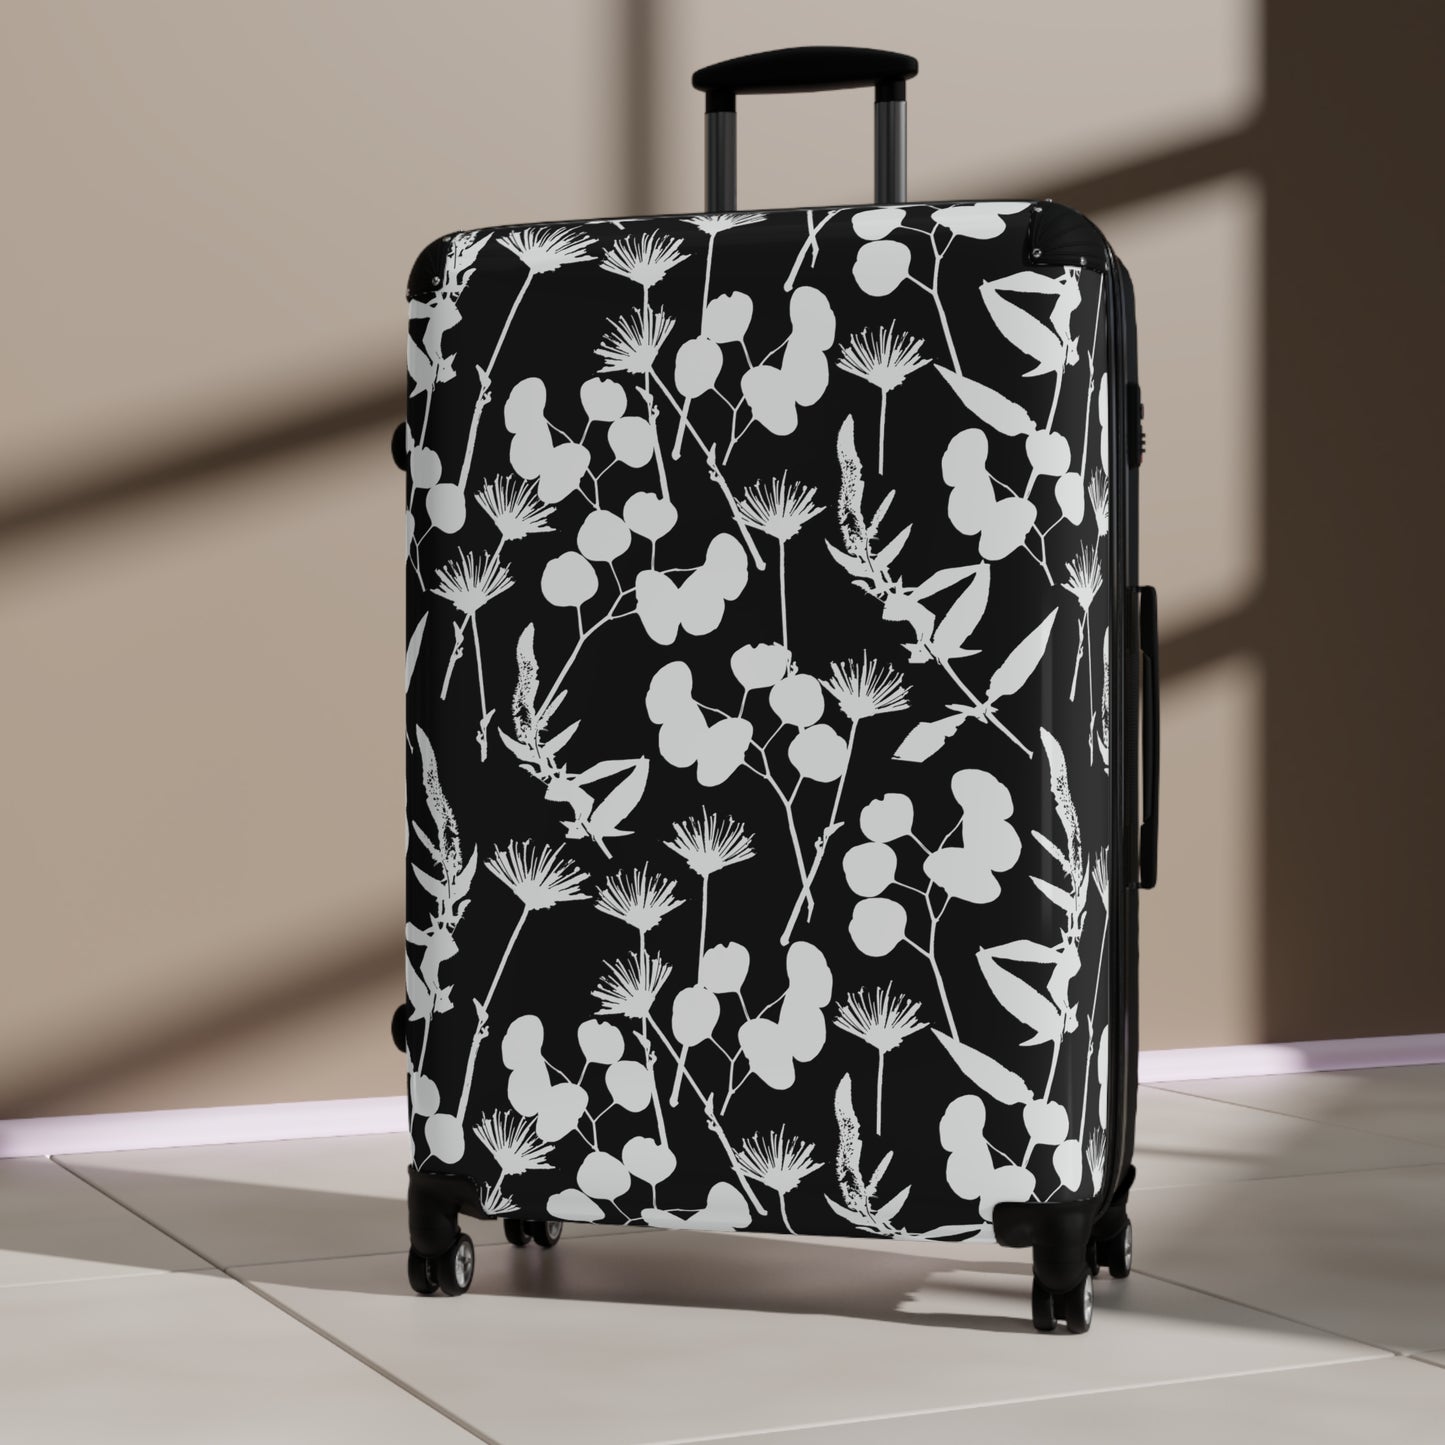 Black and White Floral Suitcase